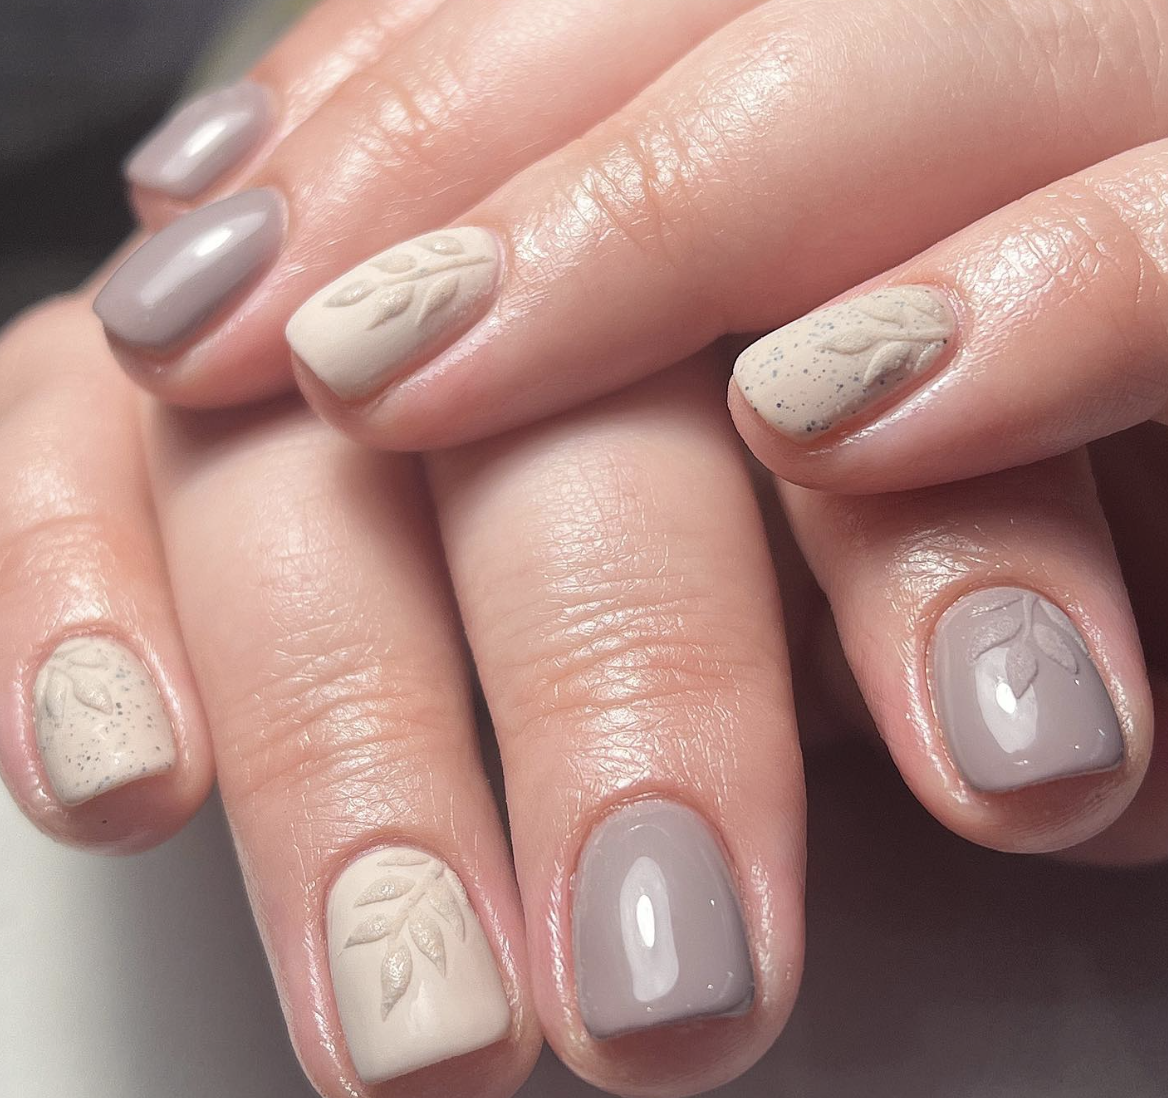 Image of nails in greige and beige with leaf detailing